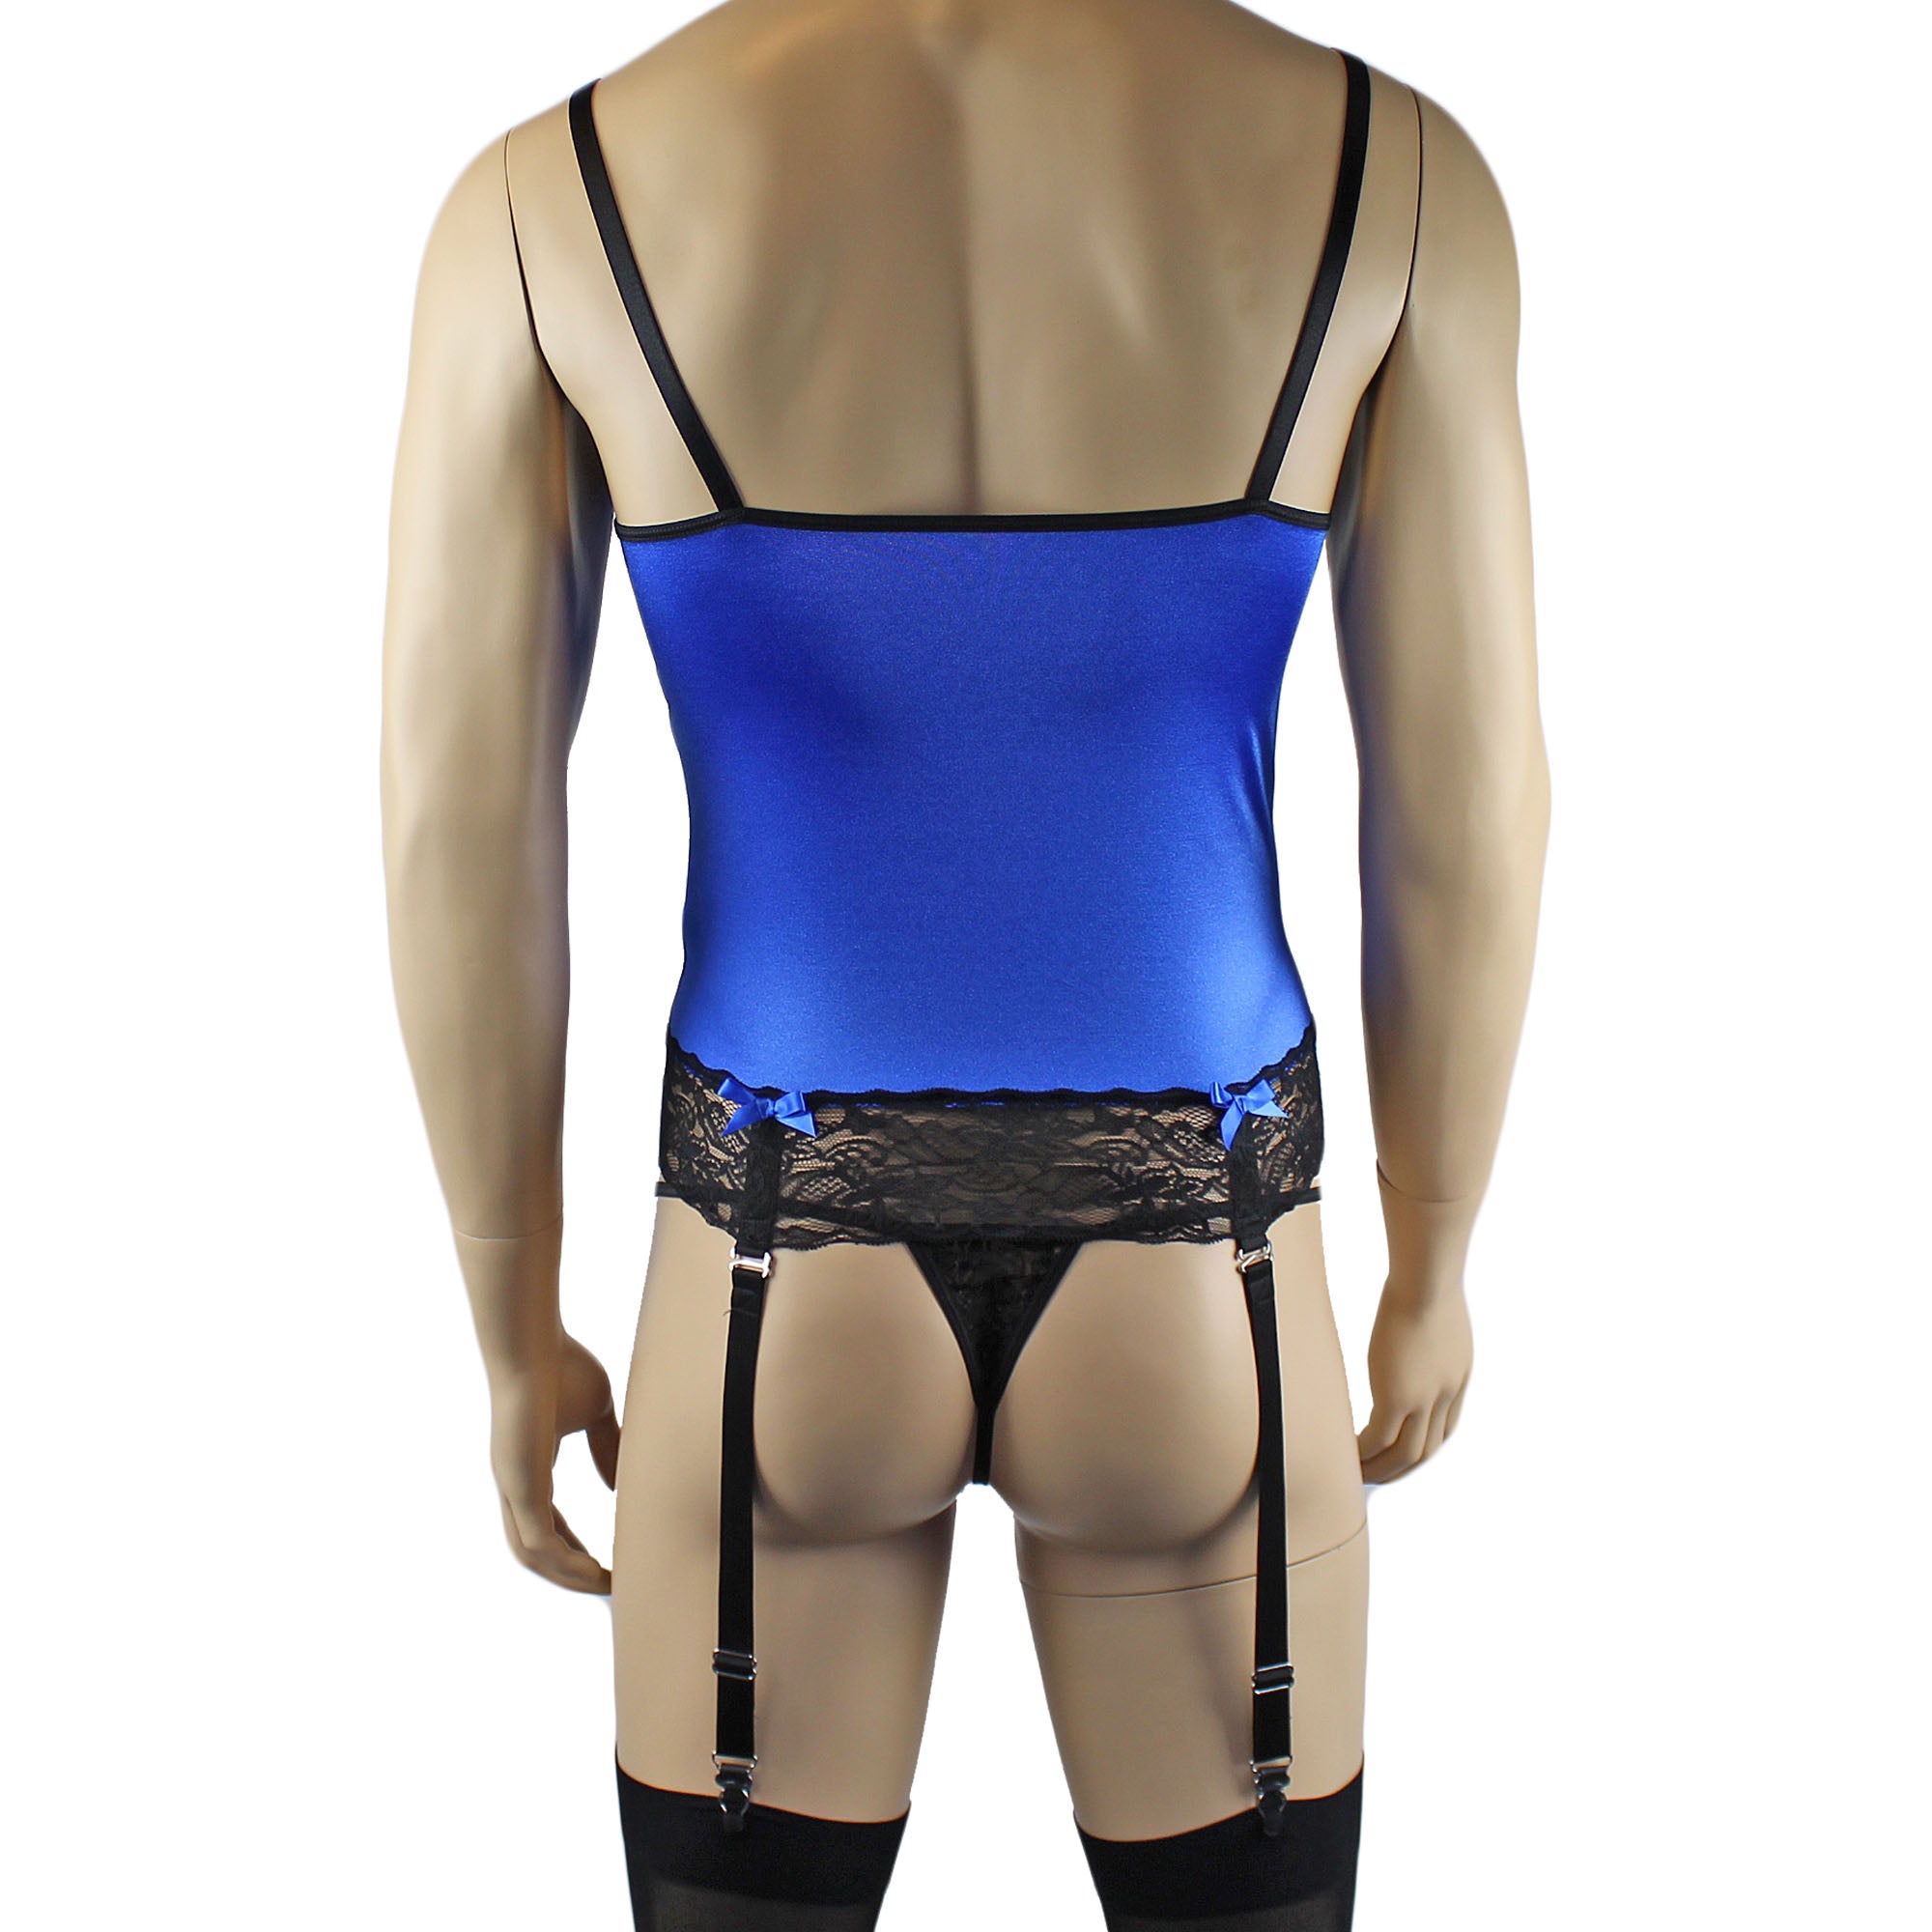 Mens Joanne Camisole Bustier Garter Top with Pouch G string & Stockings - Sizes up to 3XL Blue and Black Lace